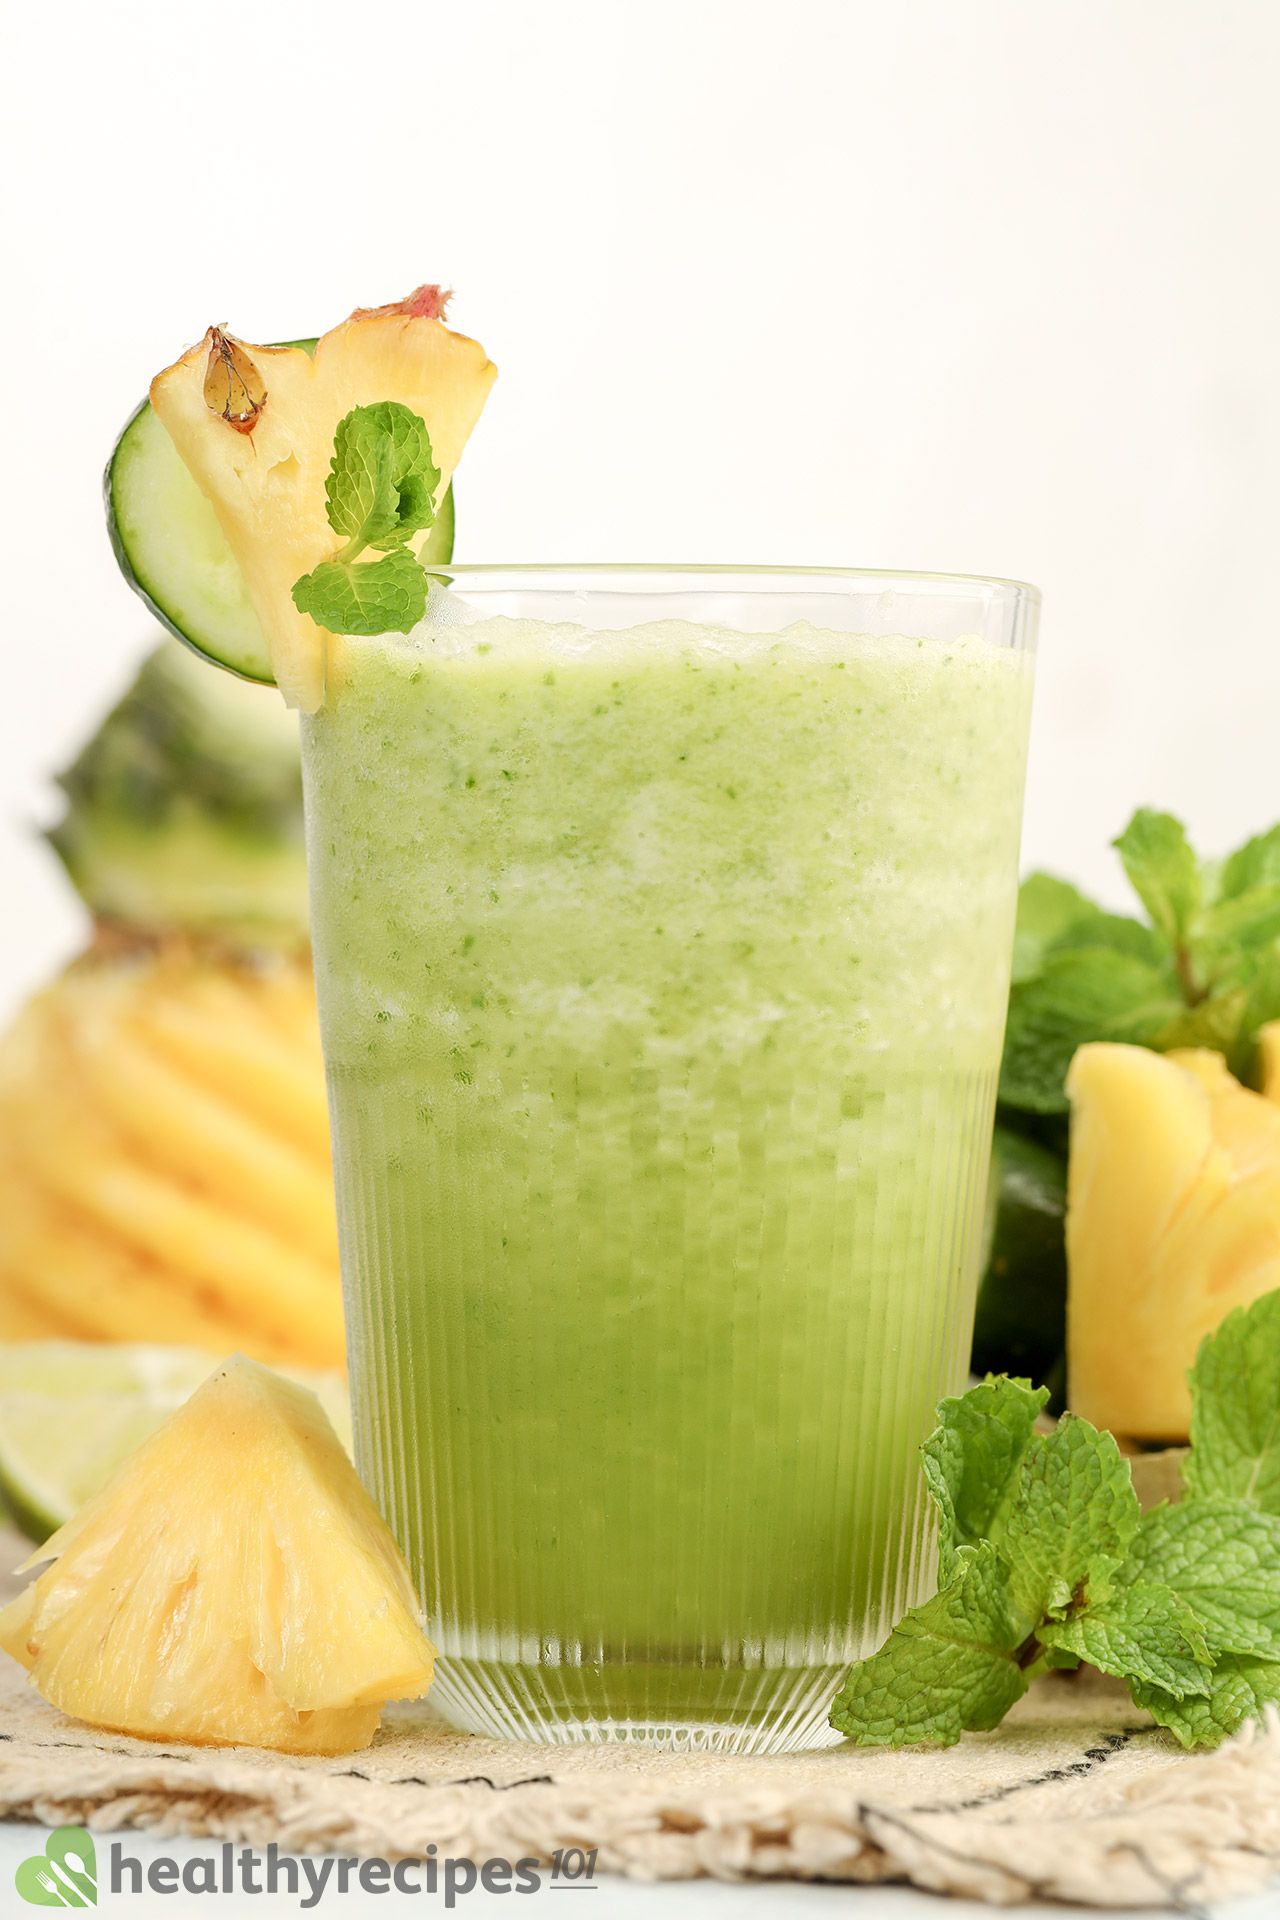 Is Cucumber Pineapple Smoothie Healthy